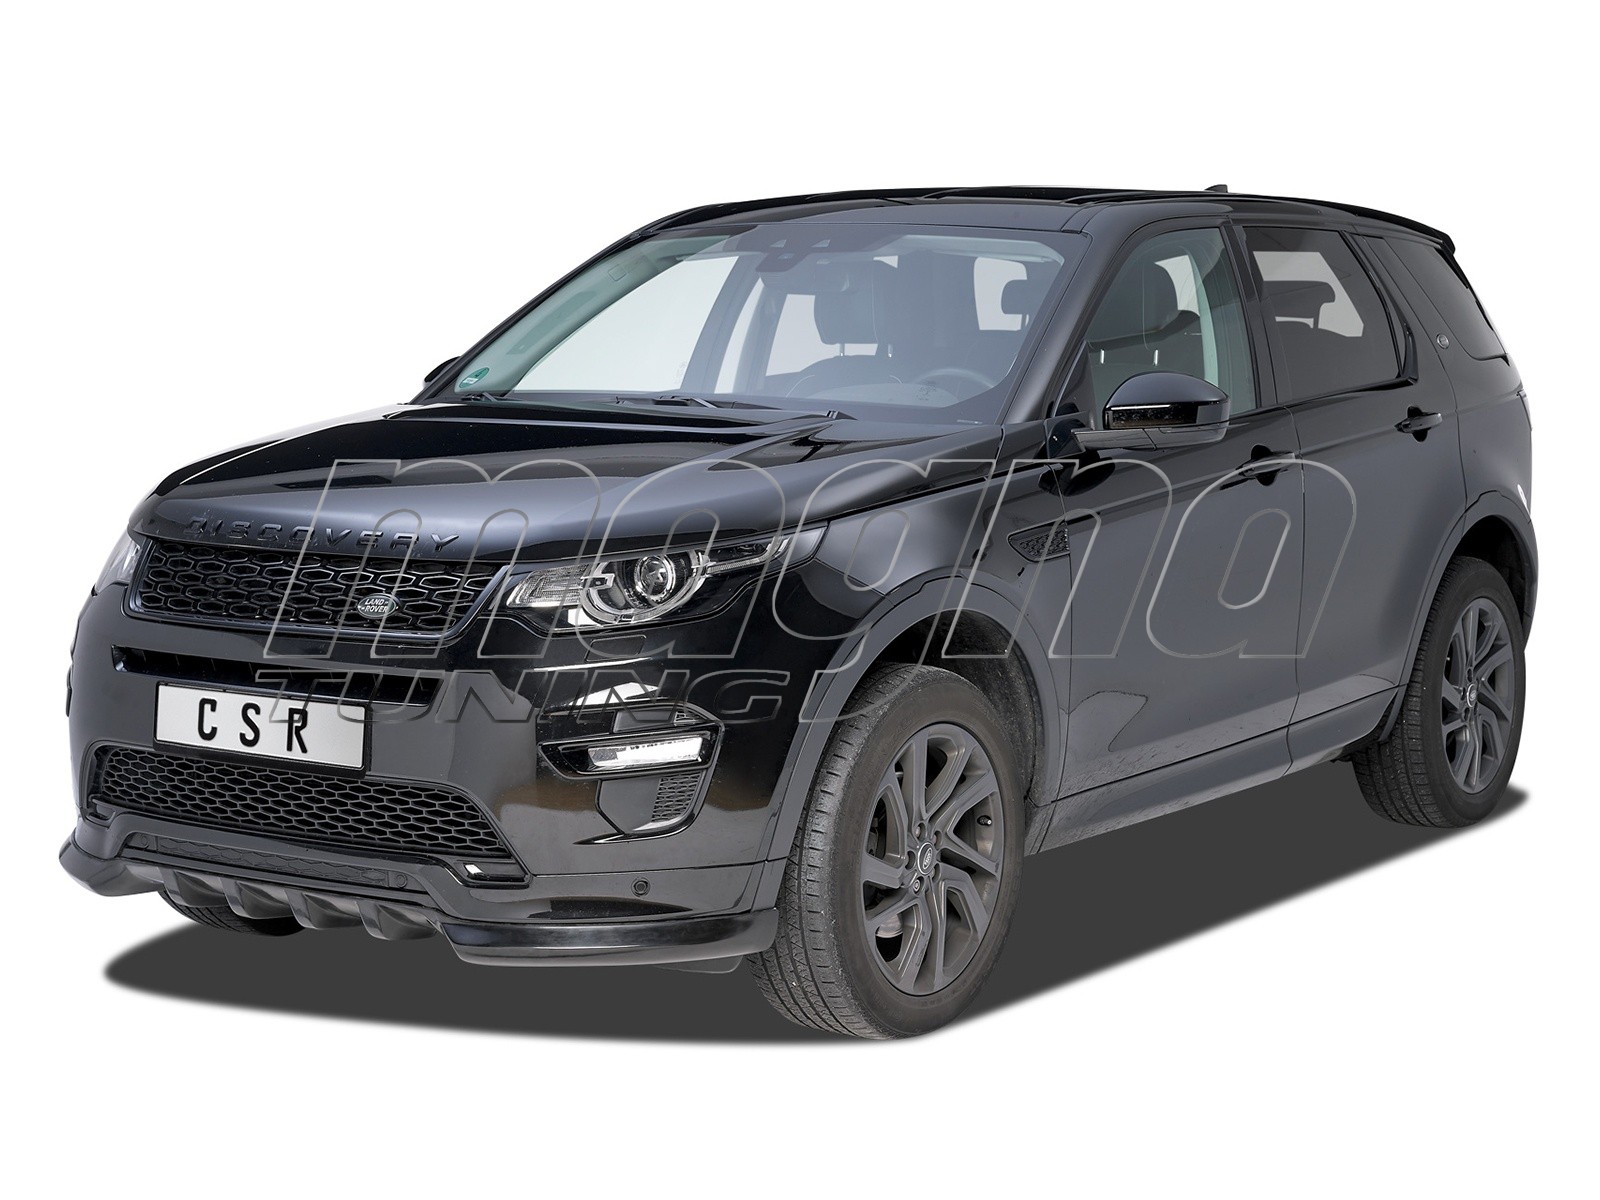 https://www.magnatuning.com/images/Land-Rover-Discovery-Sport-1-L550-Citrix-Body-Kit_picture_51292.jpg